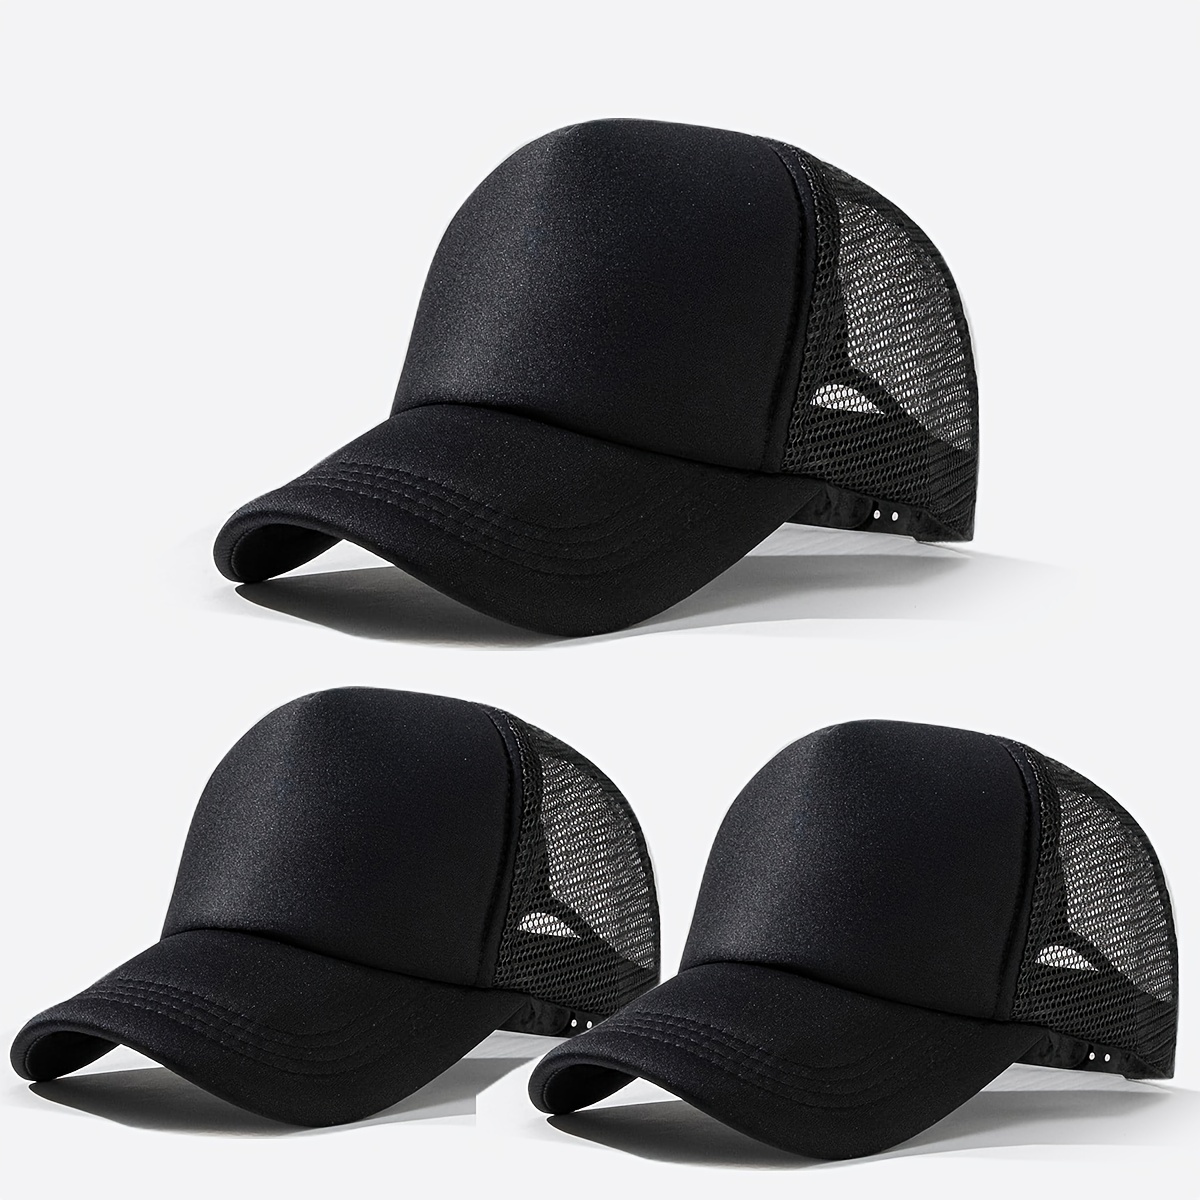 

3pcs, Cool Curved Brim Baseball Caps For Diy, Breathable Mesh Trucker Hats, Snapback Hats For Casual Leisure Outdoor Sports